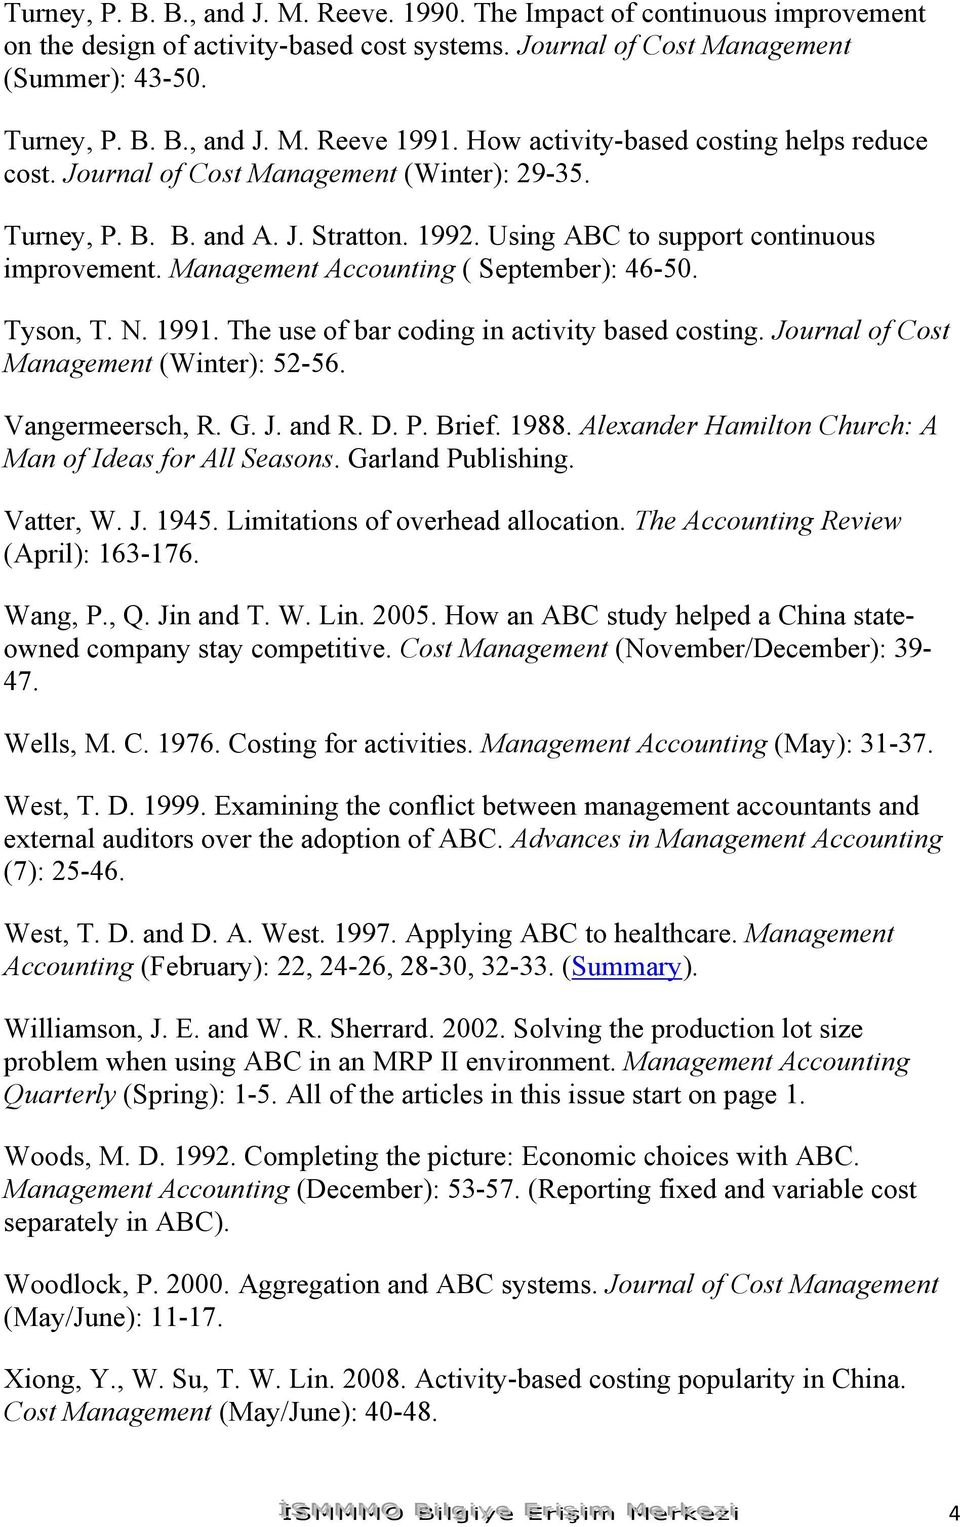 Management Accounting ( September): 46-50. Tyson, T. N. 1991. The use of bar coding in activity based costing. Journal of Cost Management (Winter): 52-56. Vangermeersch, R. G. J. and R. D. P. Brief.